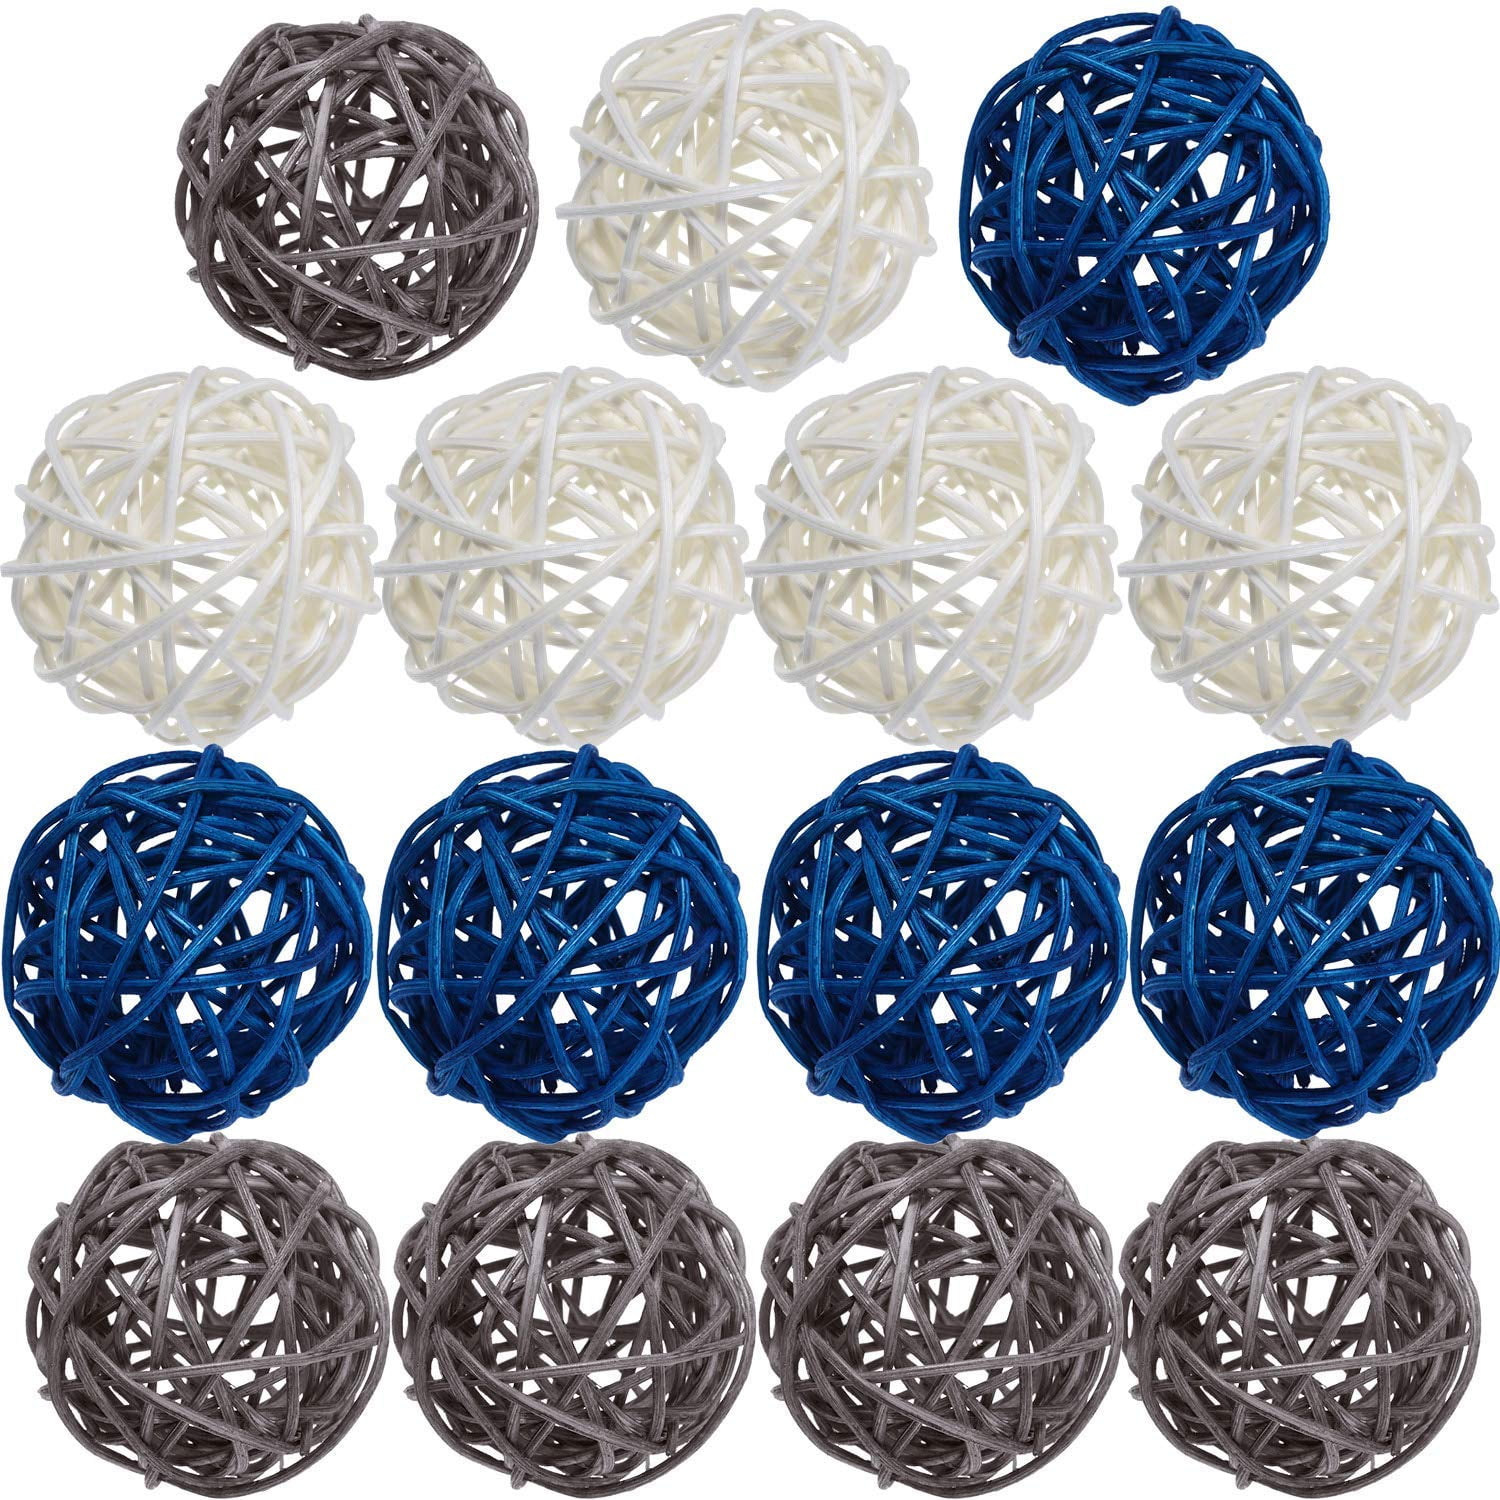 Wicker Rattan Balls,Love Shape 16, Blue Comes with Lanyard and Photo Clip Wedding Table Decoration,Themed Party,Aromatherapy Accessories Decorative Ball Orbs Vase Fillers for Craft Project